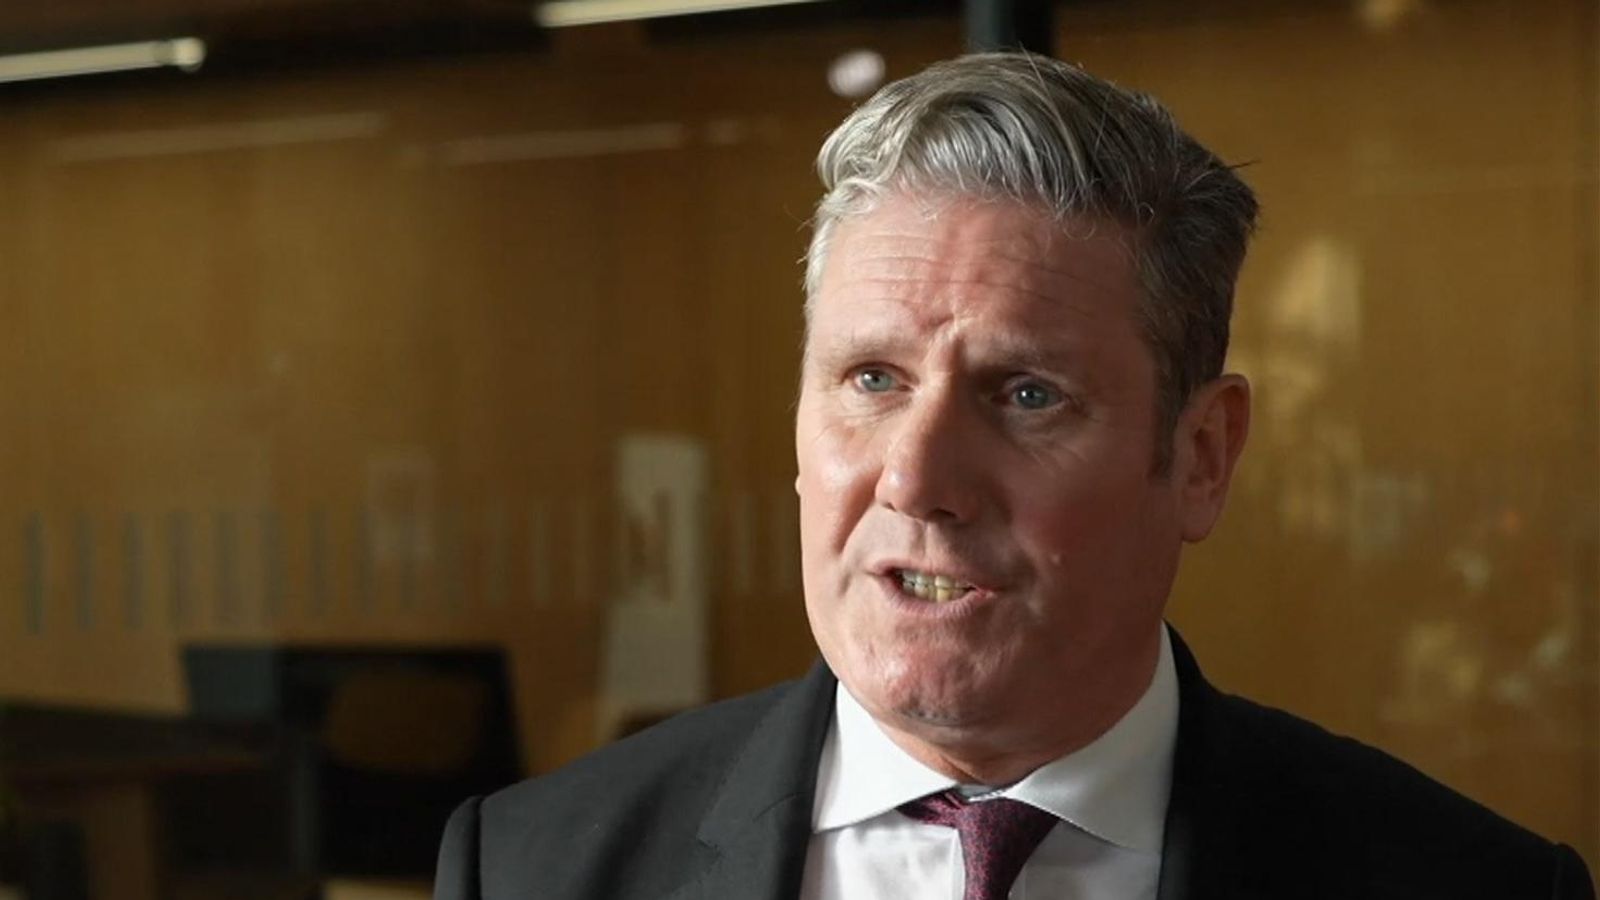 Sir Keir Starmer vows to cut taxes for working people and rules out Swiss-style EU deal 